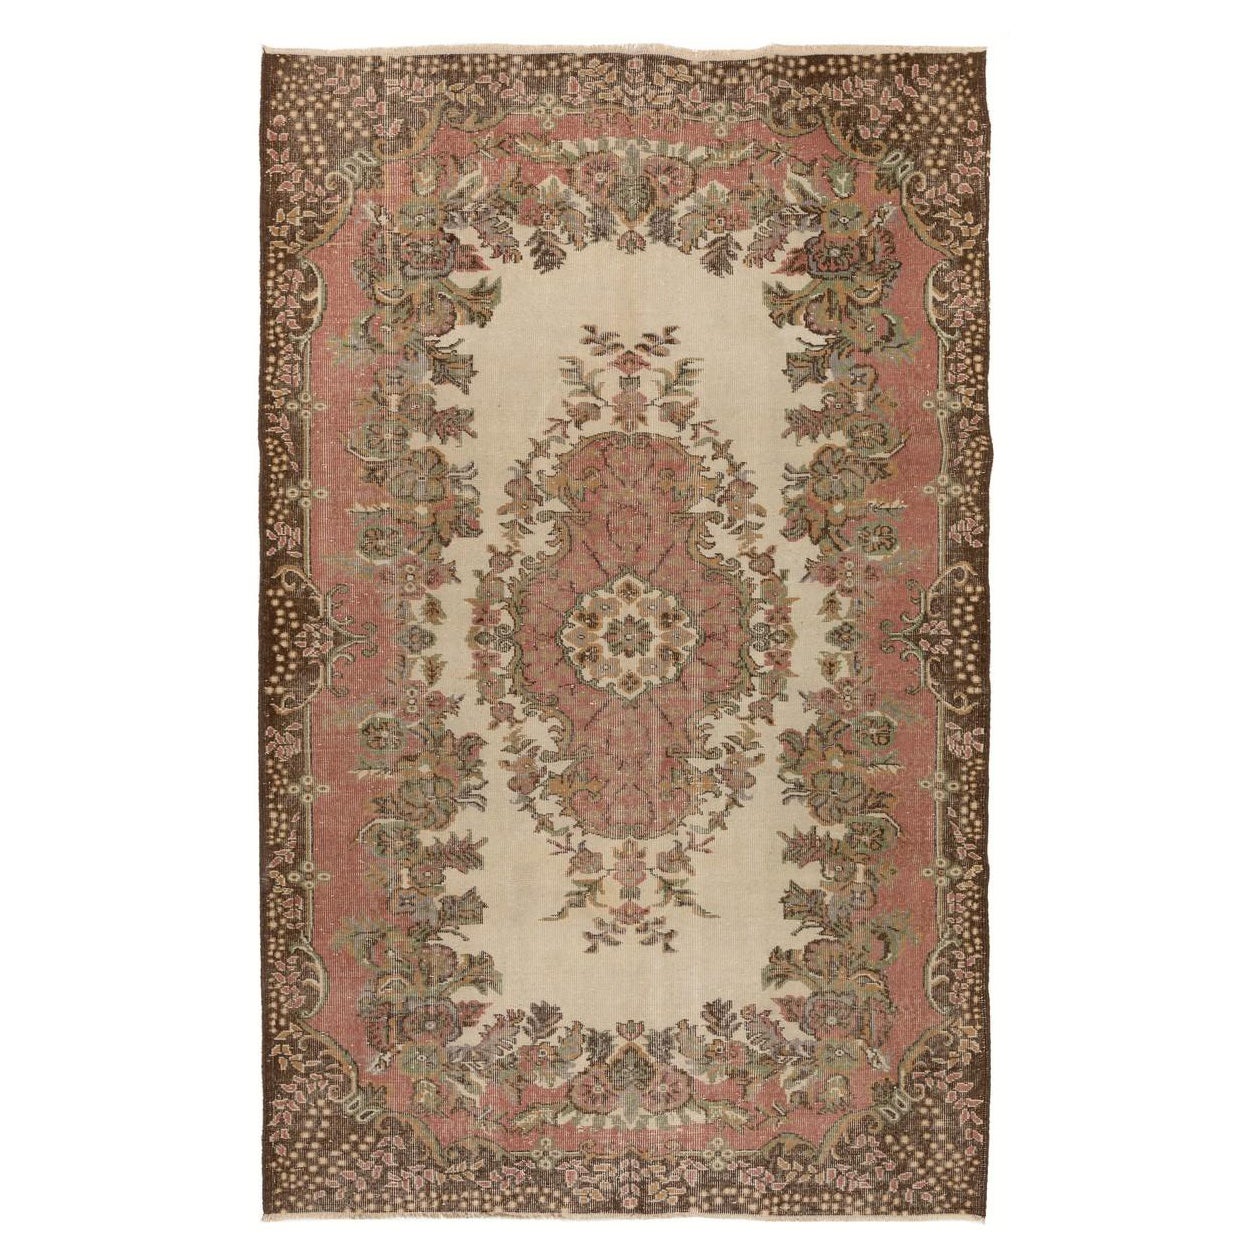 6x9 Ft Authentic Hand-Knotted Vintage Anatolian Area Rug with Baroque Design